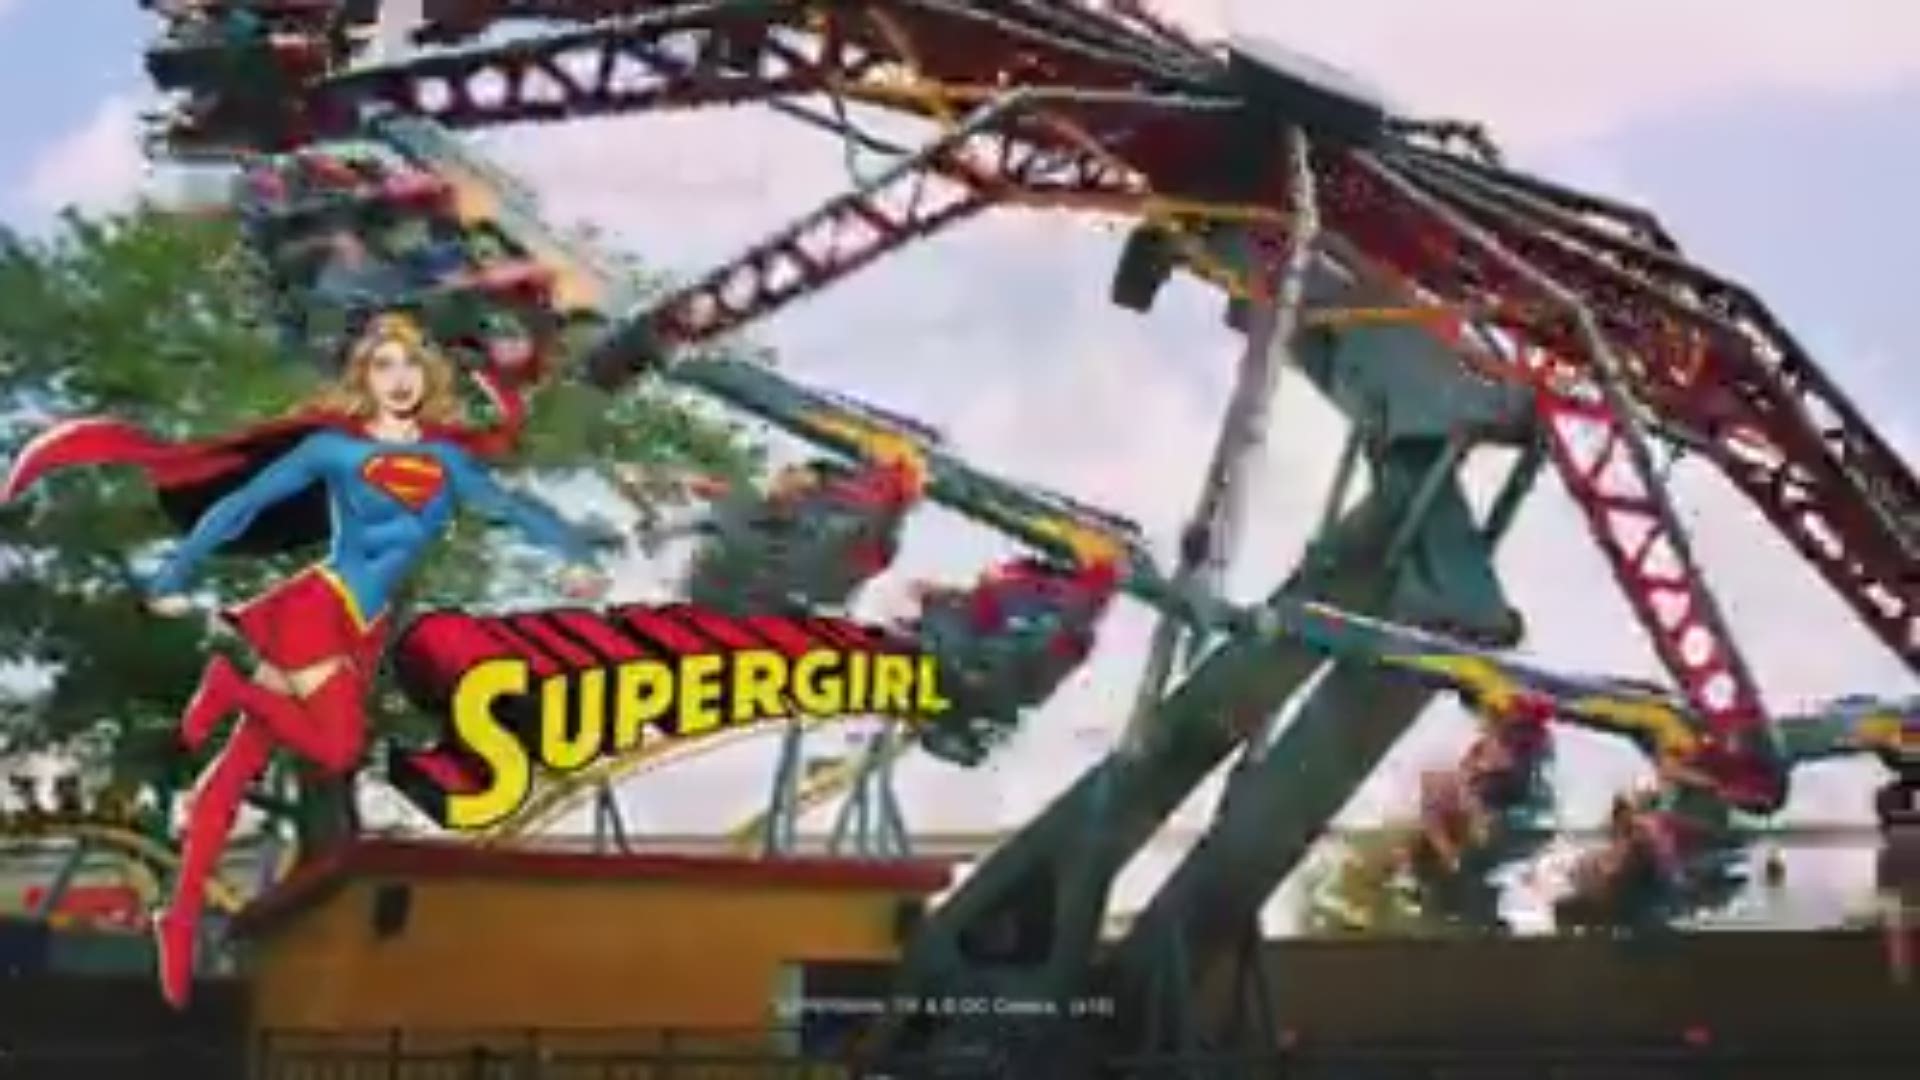 WATCH: Supergirl thrill ride at Six Flags St. Louis | www.ermes-unice.fr